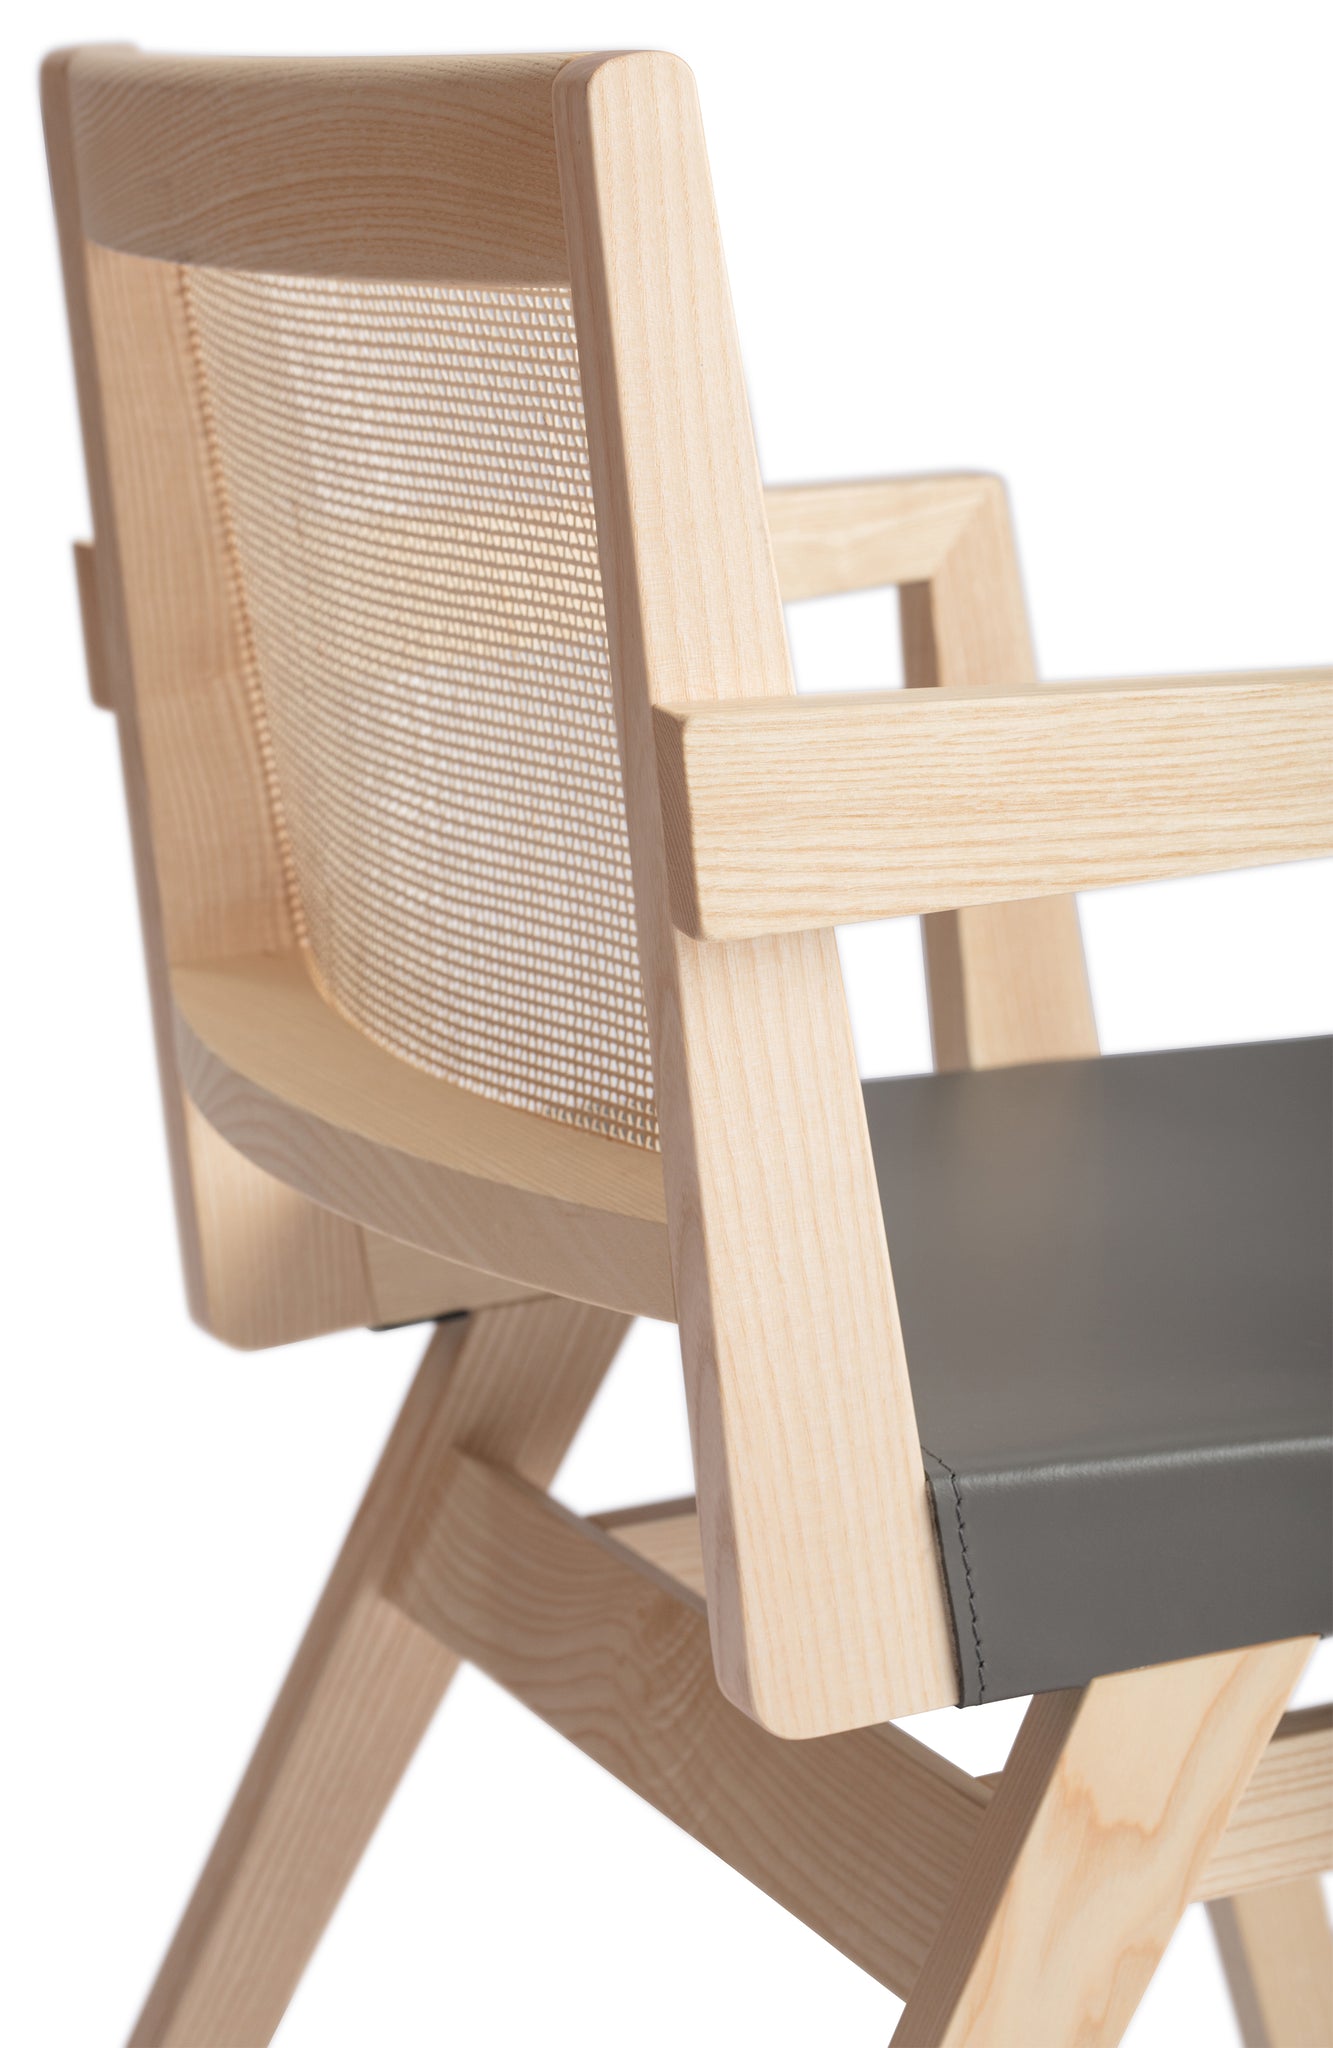 Close-up 1 of an "Elye" designer dining chair, walnut stained ash frame, square weave cane back, contract grade off white leather seat, produced by Klarel in Italy. #K40-3